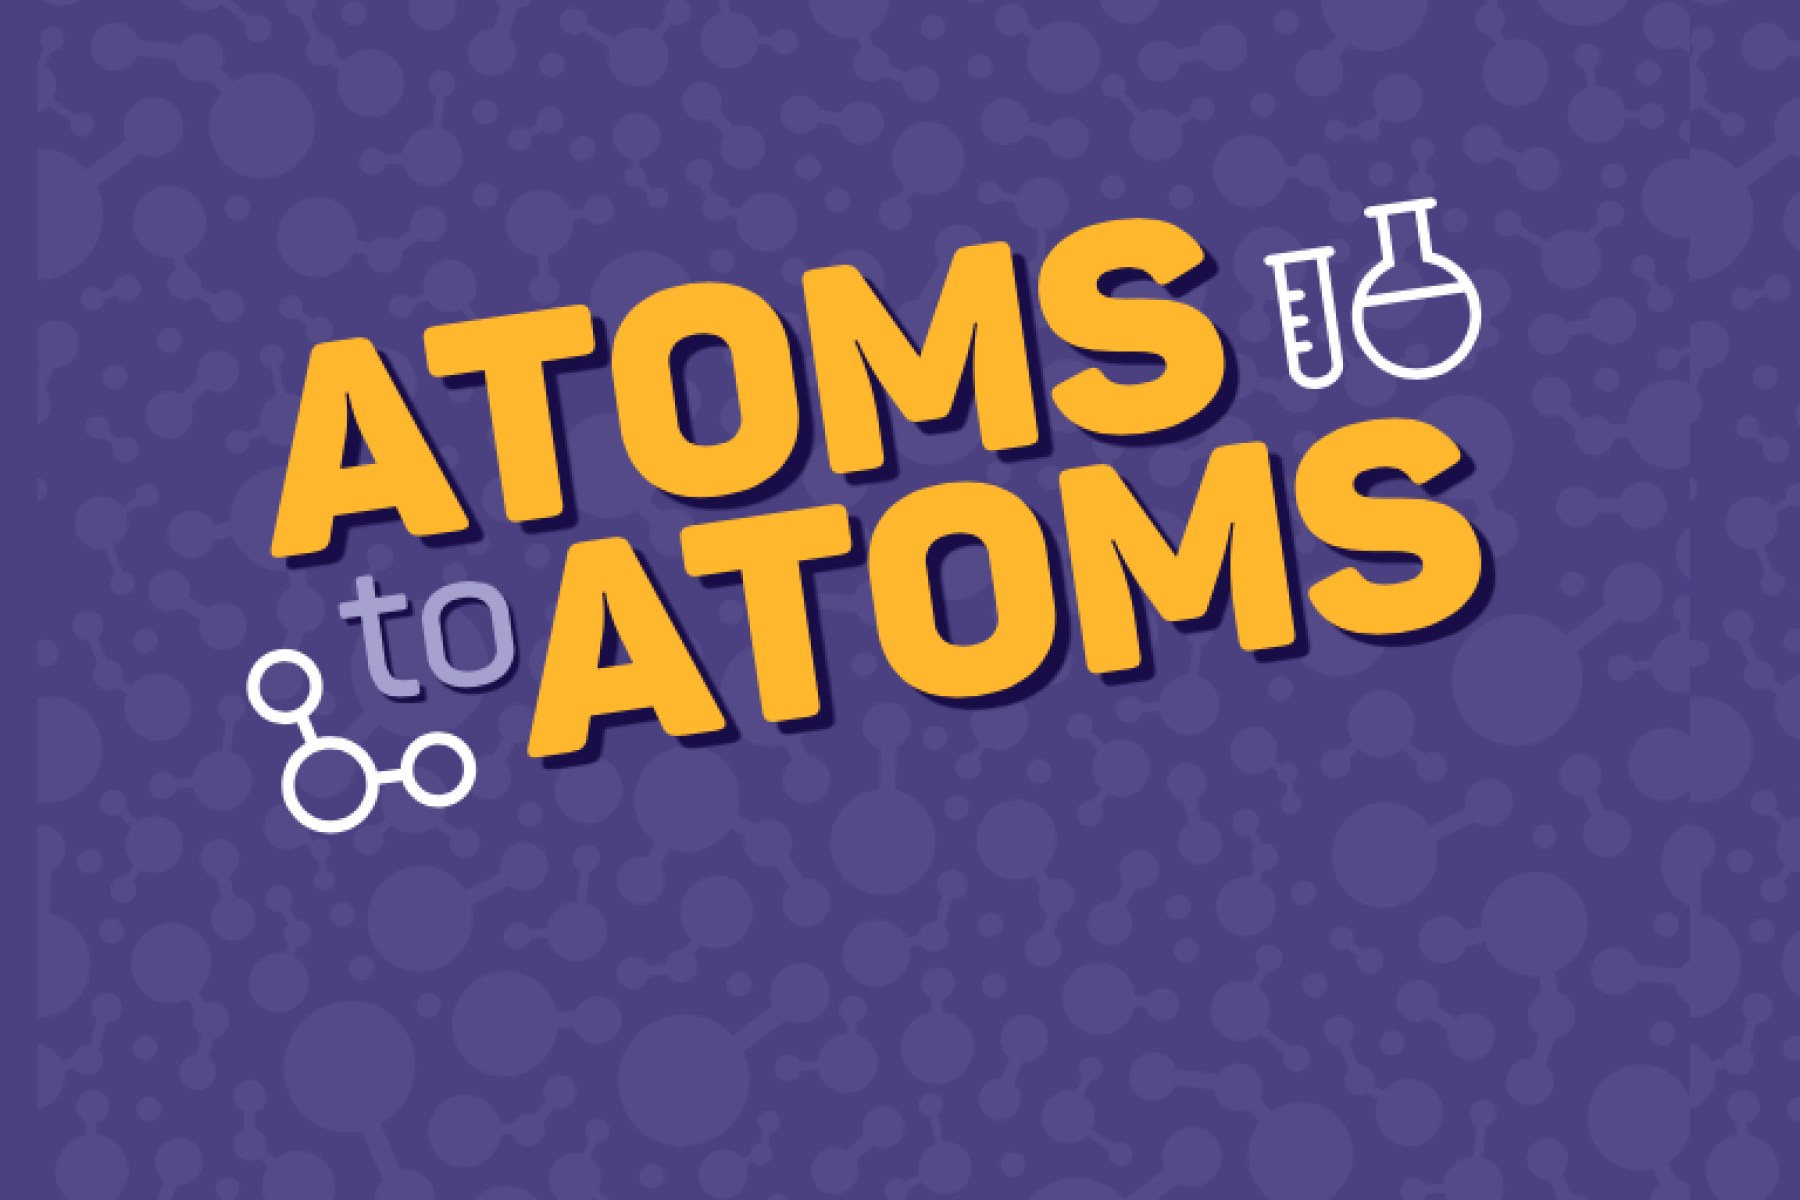 Image of the back side of the Atoms to Atoms card